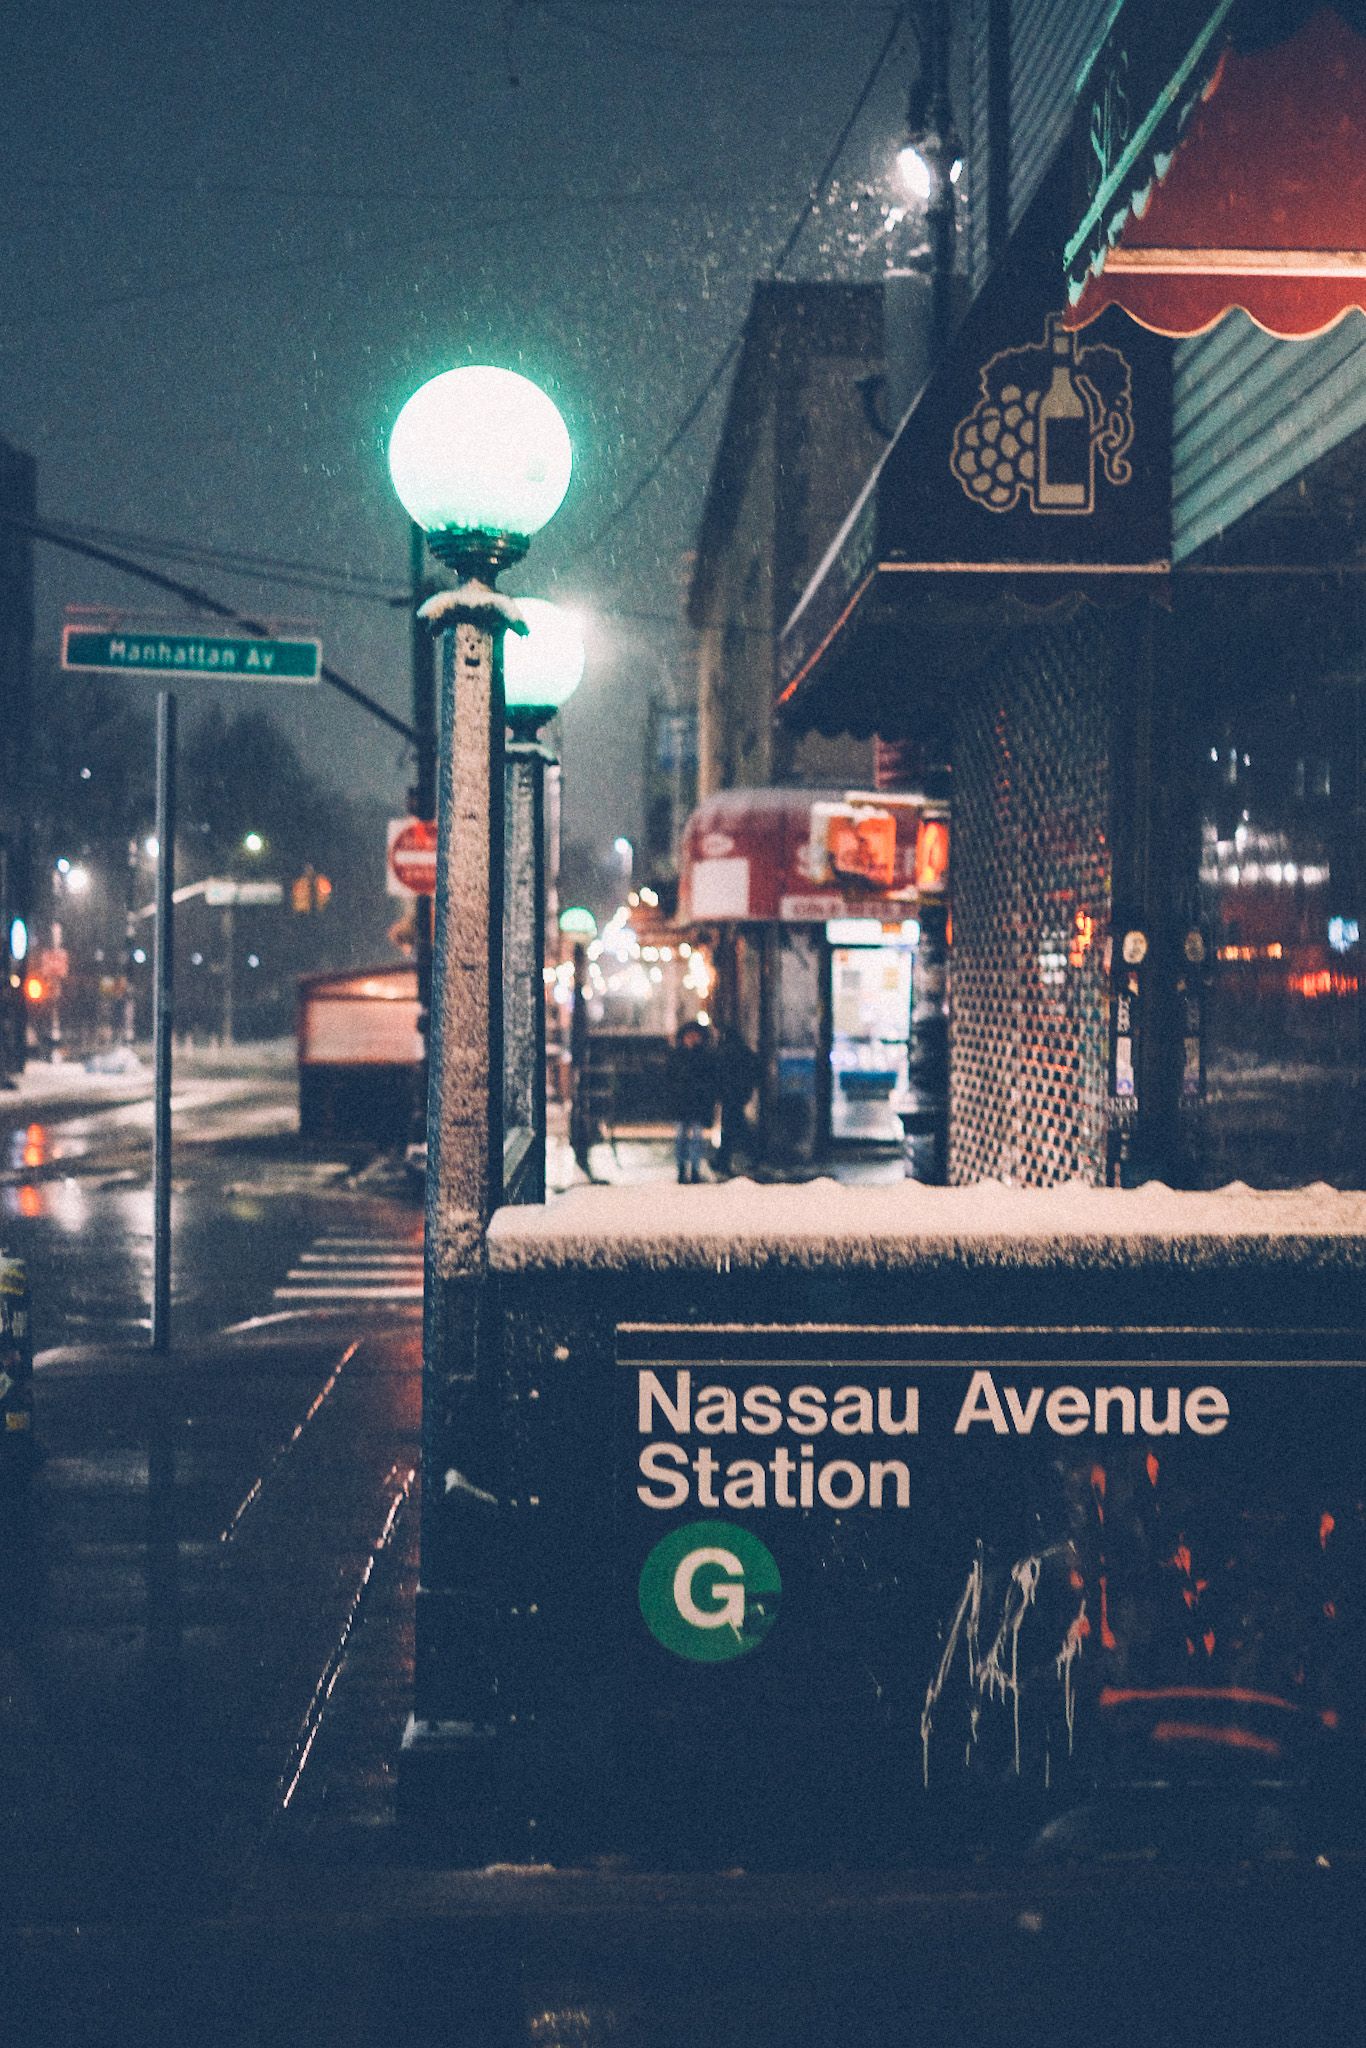 A pair of green NYC subway lamps illuminate the Nassau Avenue station on a snowy night in Brooklyn.